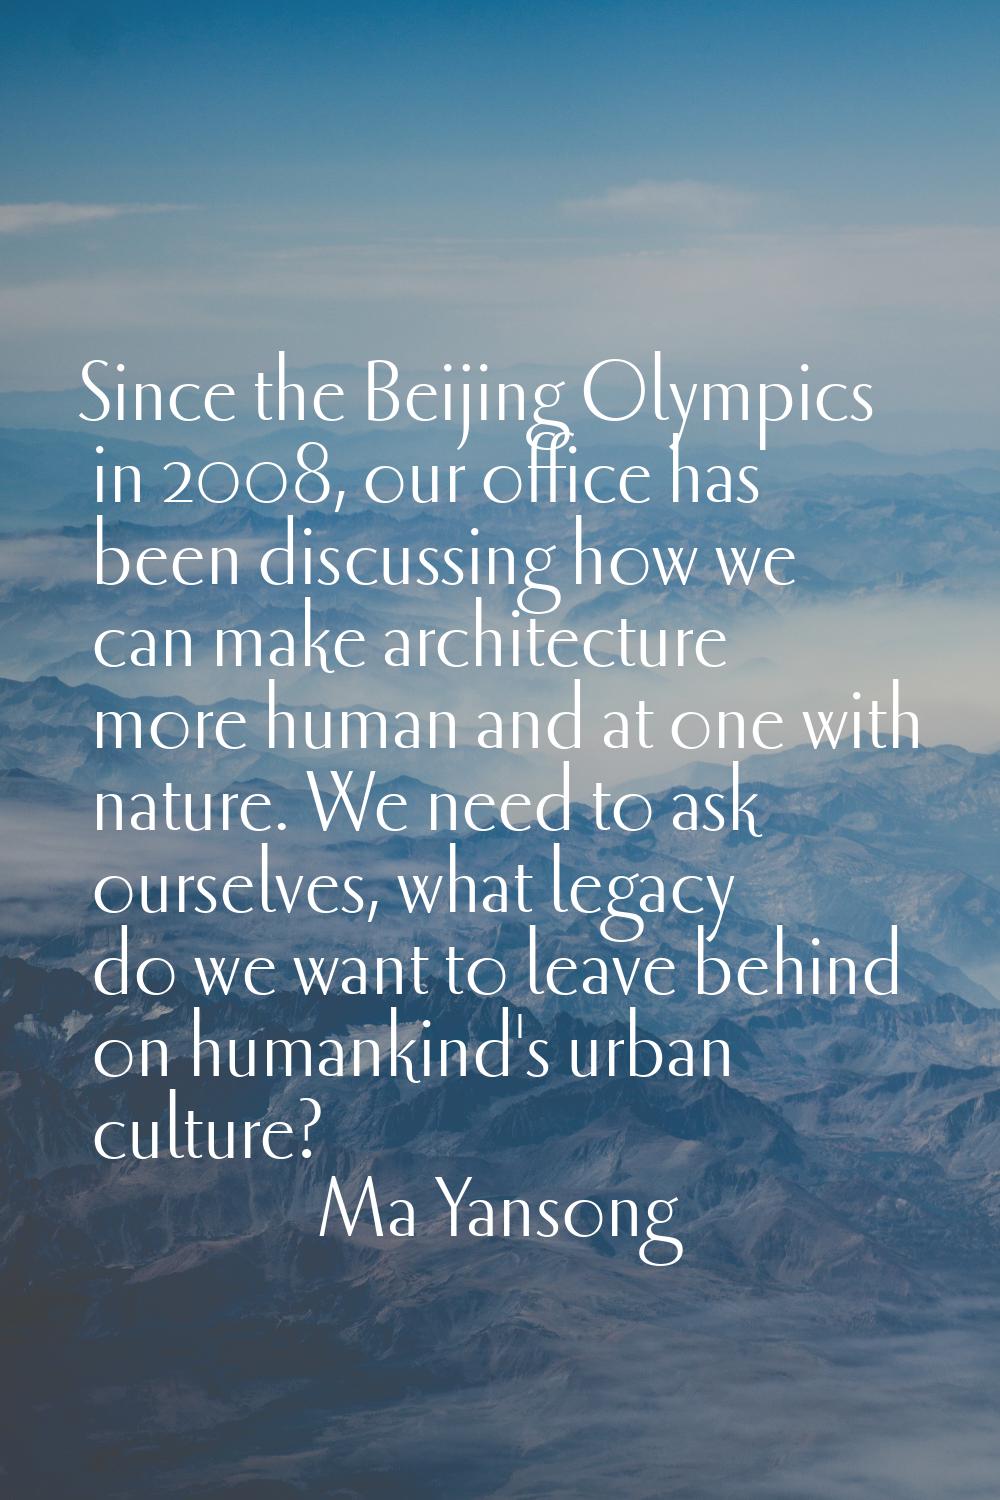 Since the Beijing Olympics in 2008, our office has been discussing how we can make architecture mor